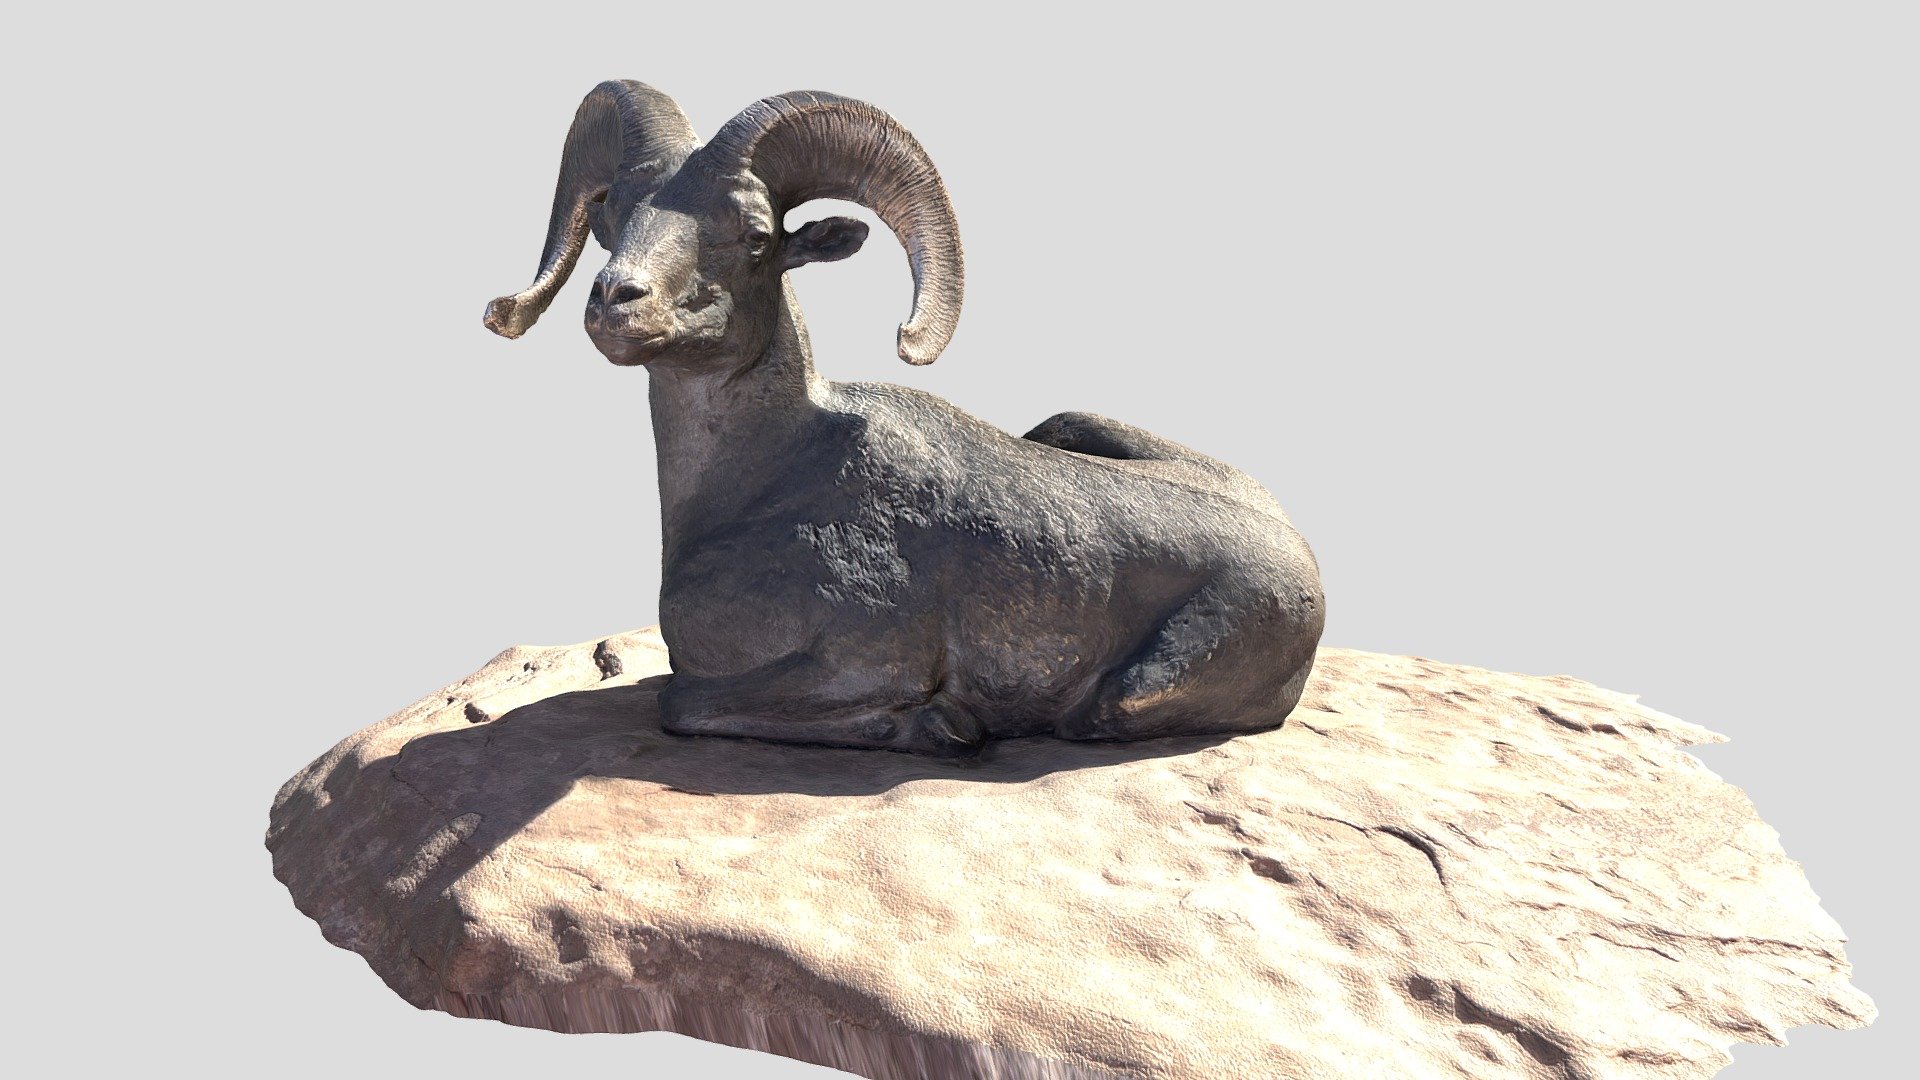 A bronze Ram statue outside the Welcome Center at Arches National Park, Utah 3d model